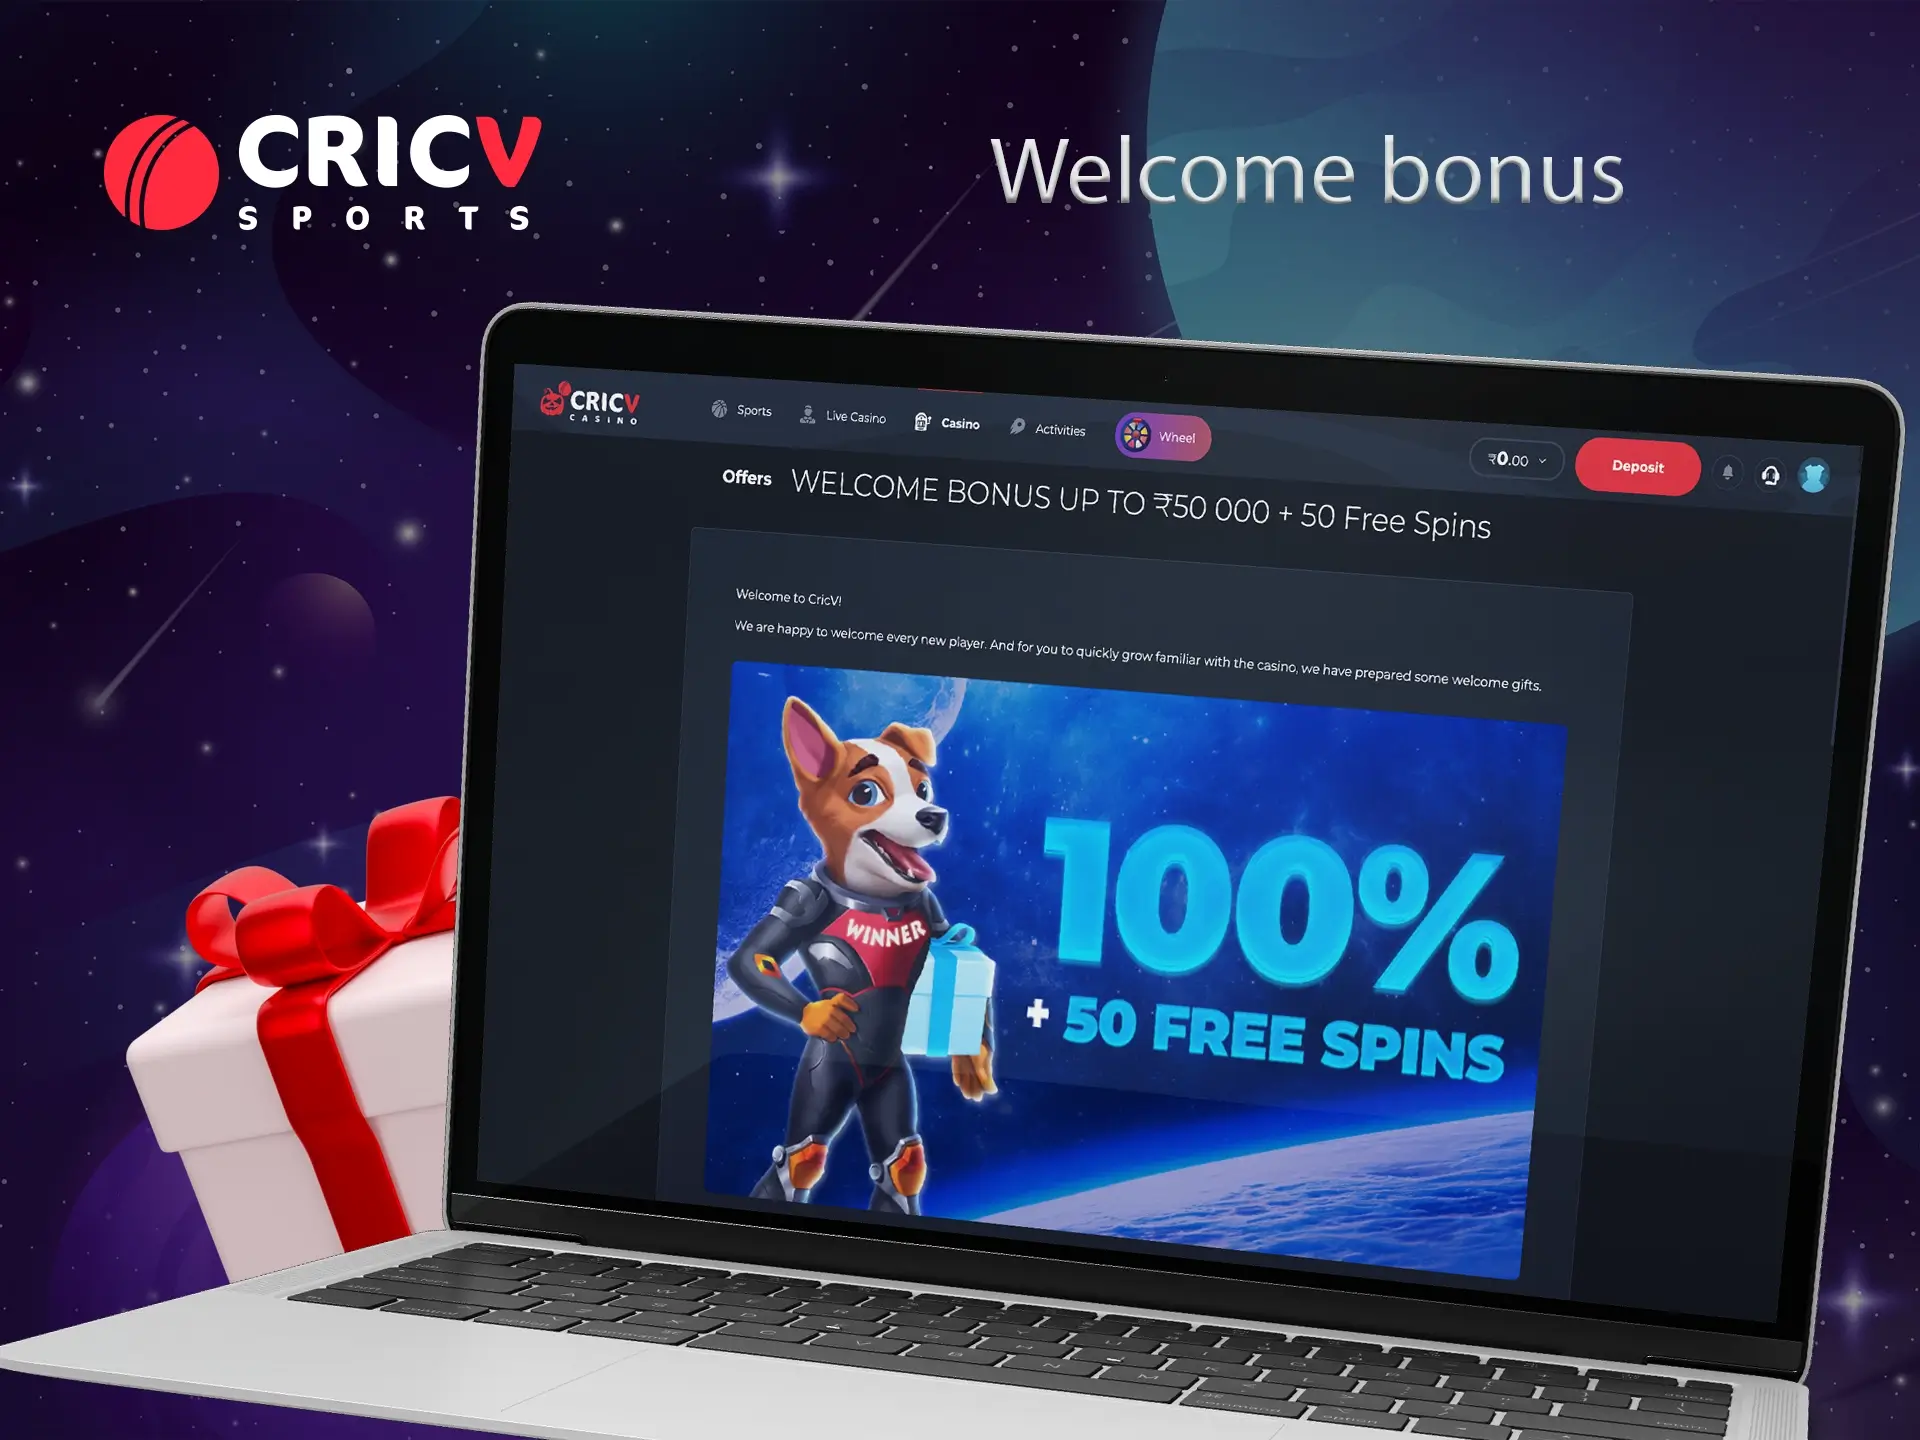 If it's your first time on Cricv, there's a superb starting bonus available to you right at the start of your journey.